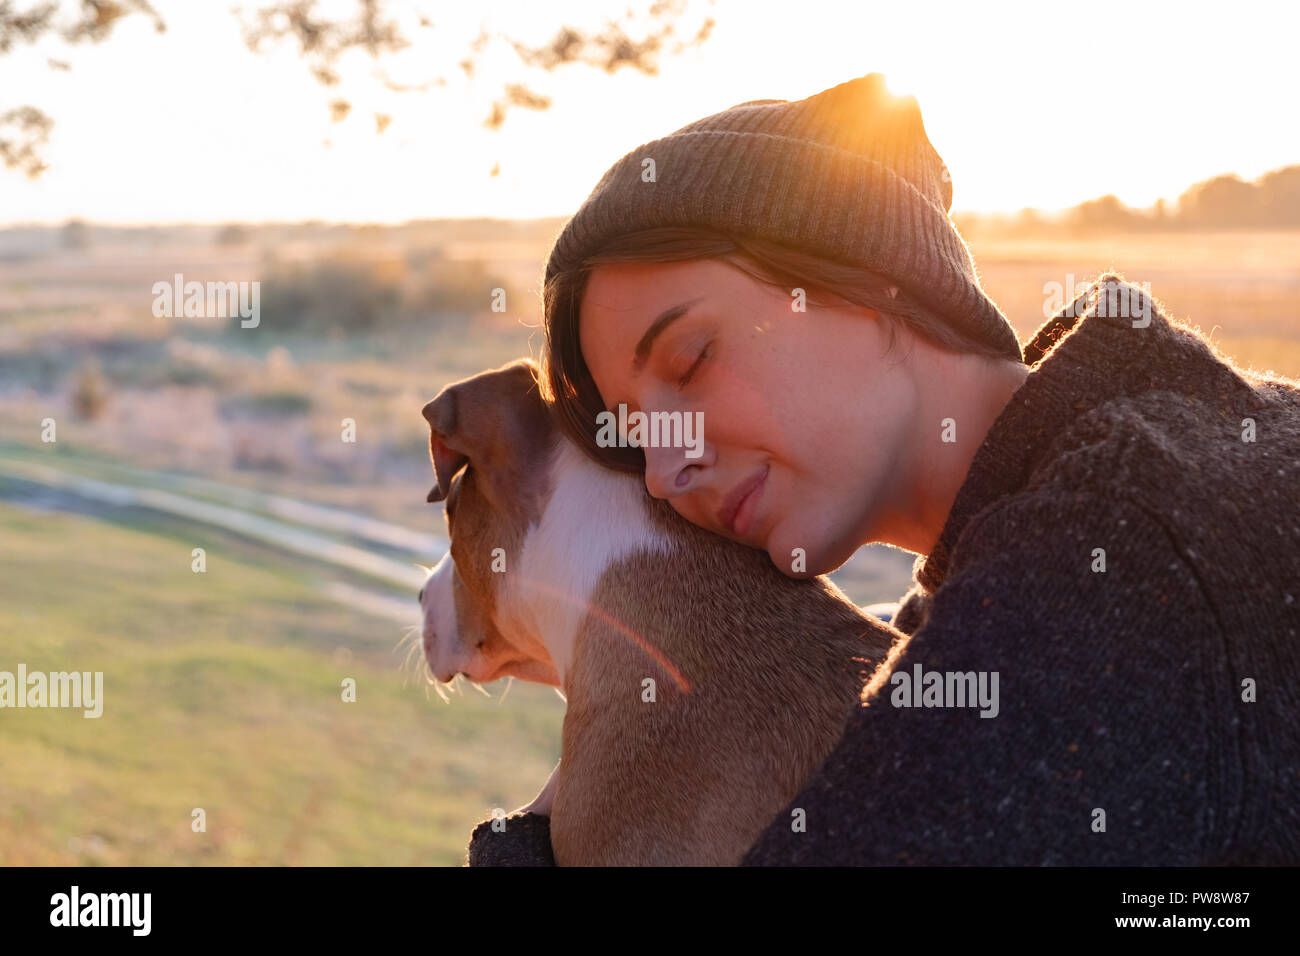 Hugging a dog in beautiful nature at sunset. Woman facing evening sun sits with her pet next to her Stock Photo